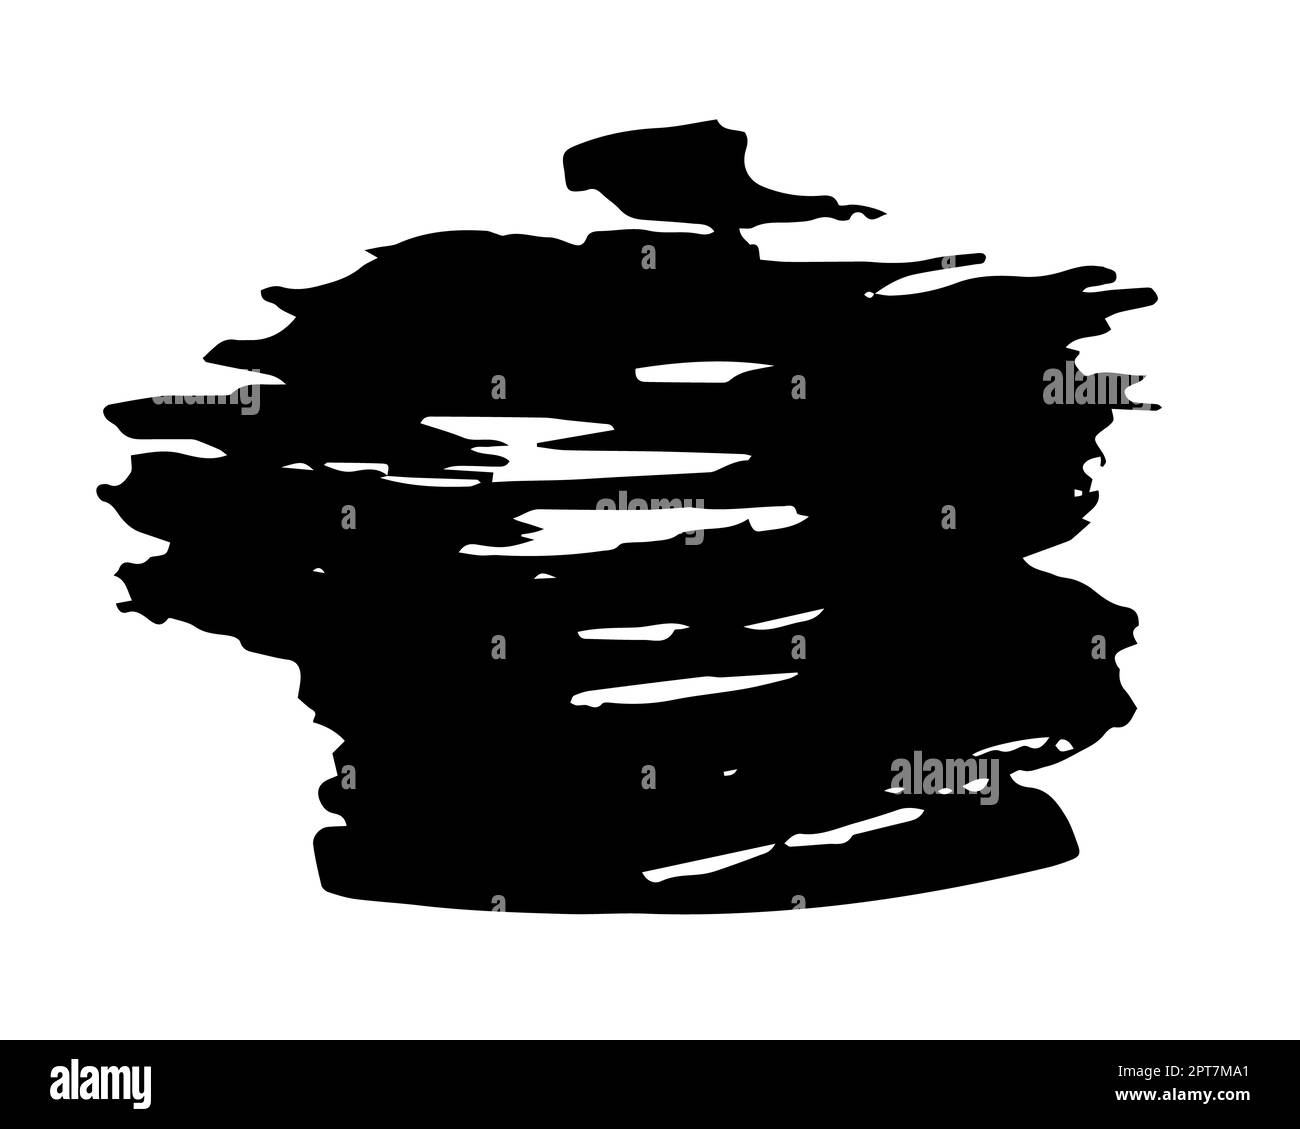 Brush stroke hand painted with black ink, isolated on white background ...